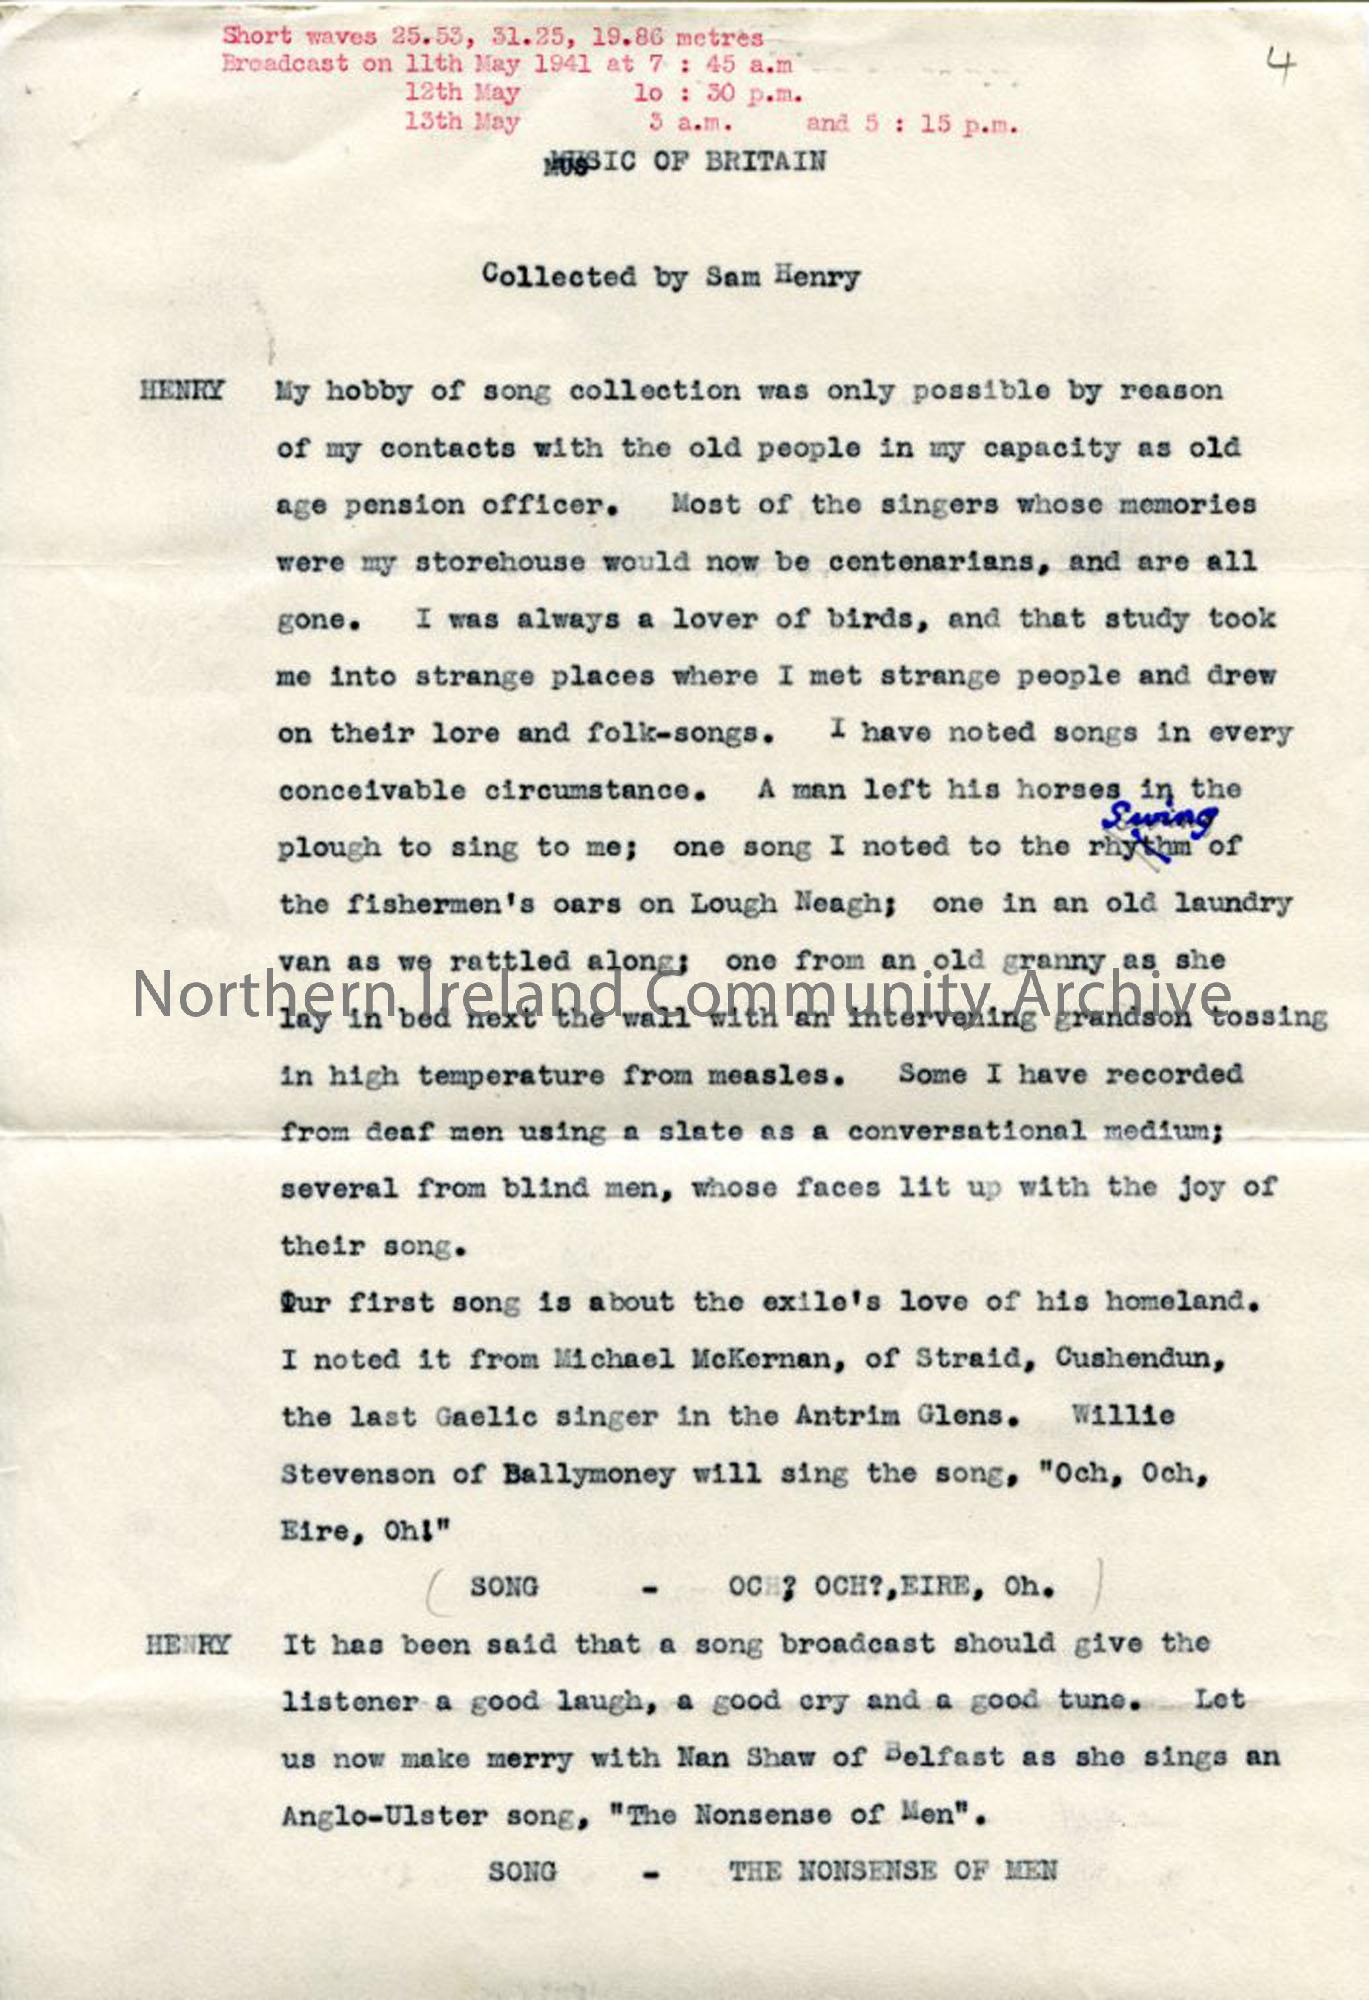 Page 1 of 2 – typed script under heading ‘Music of Britain – Collected by Sam Henry’